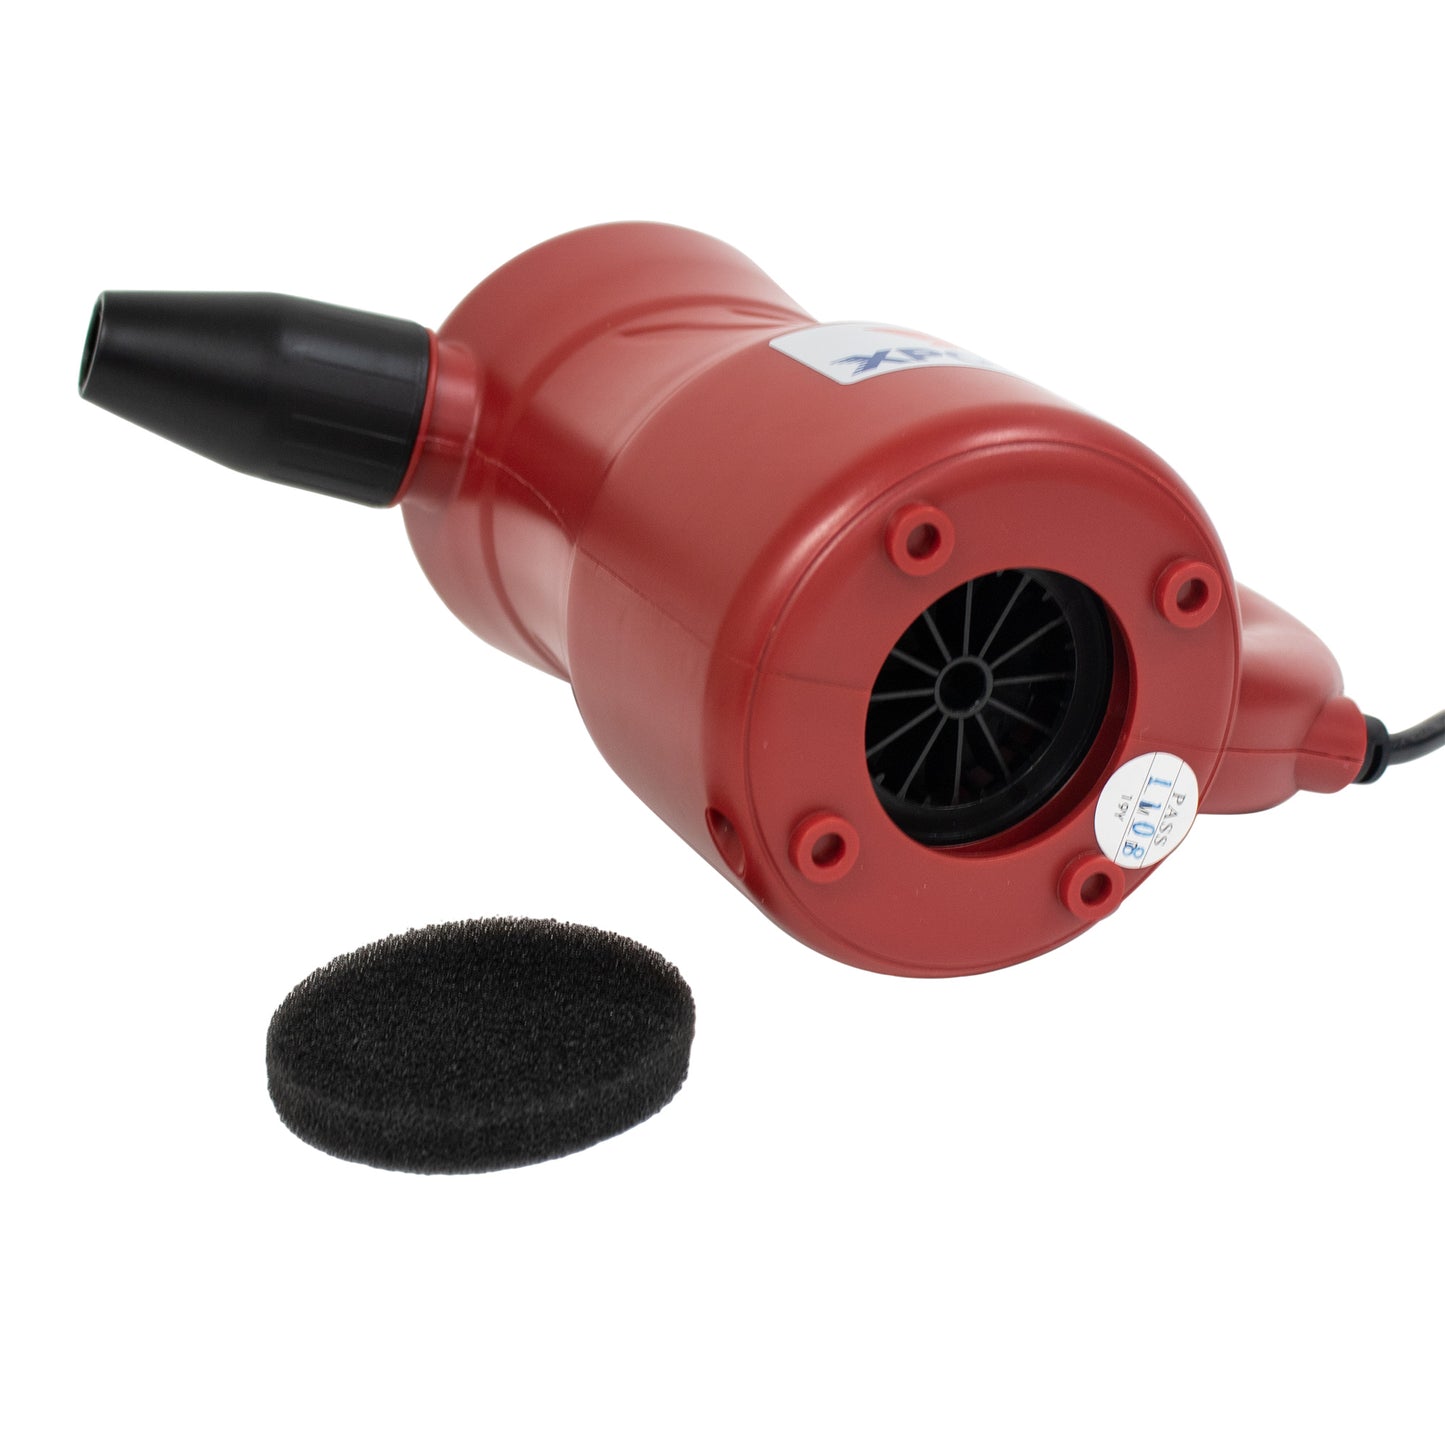 XPOWER A-2S Cyber Duster Multipurpose Electric Duster & Blower (Red)